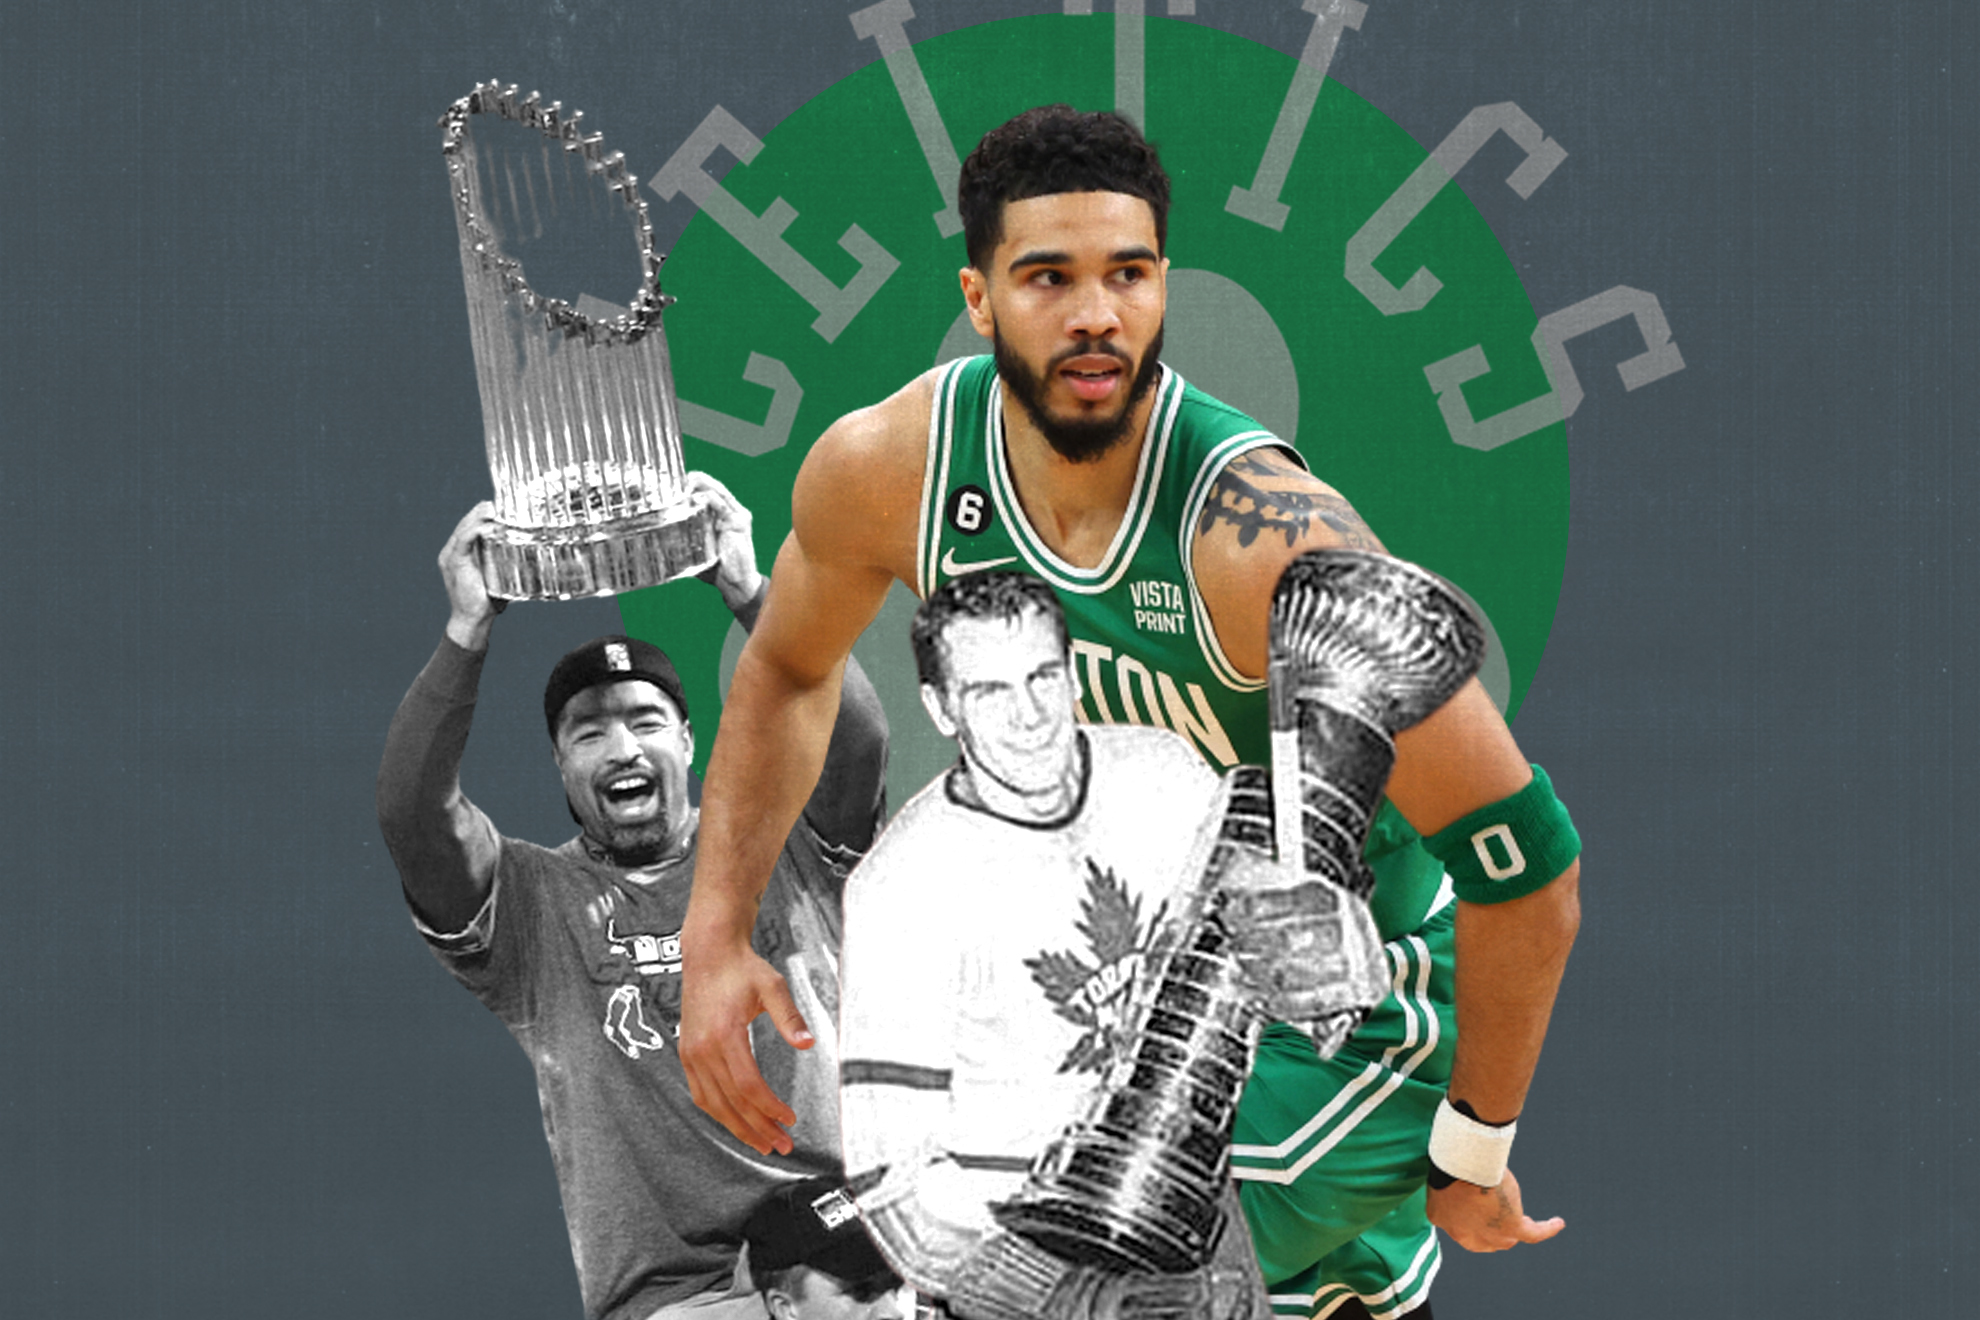 Impossible comebacks in American sports: The Celtics are on the verge of making history